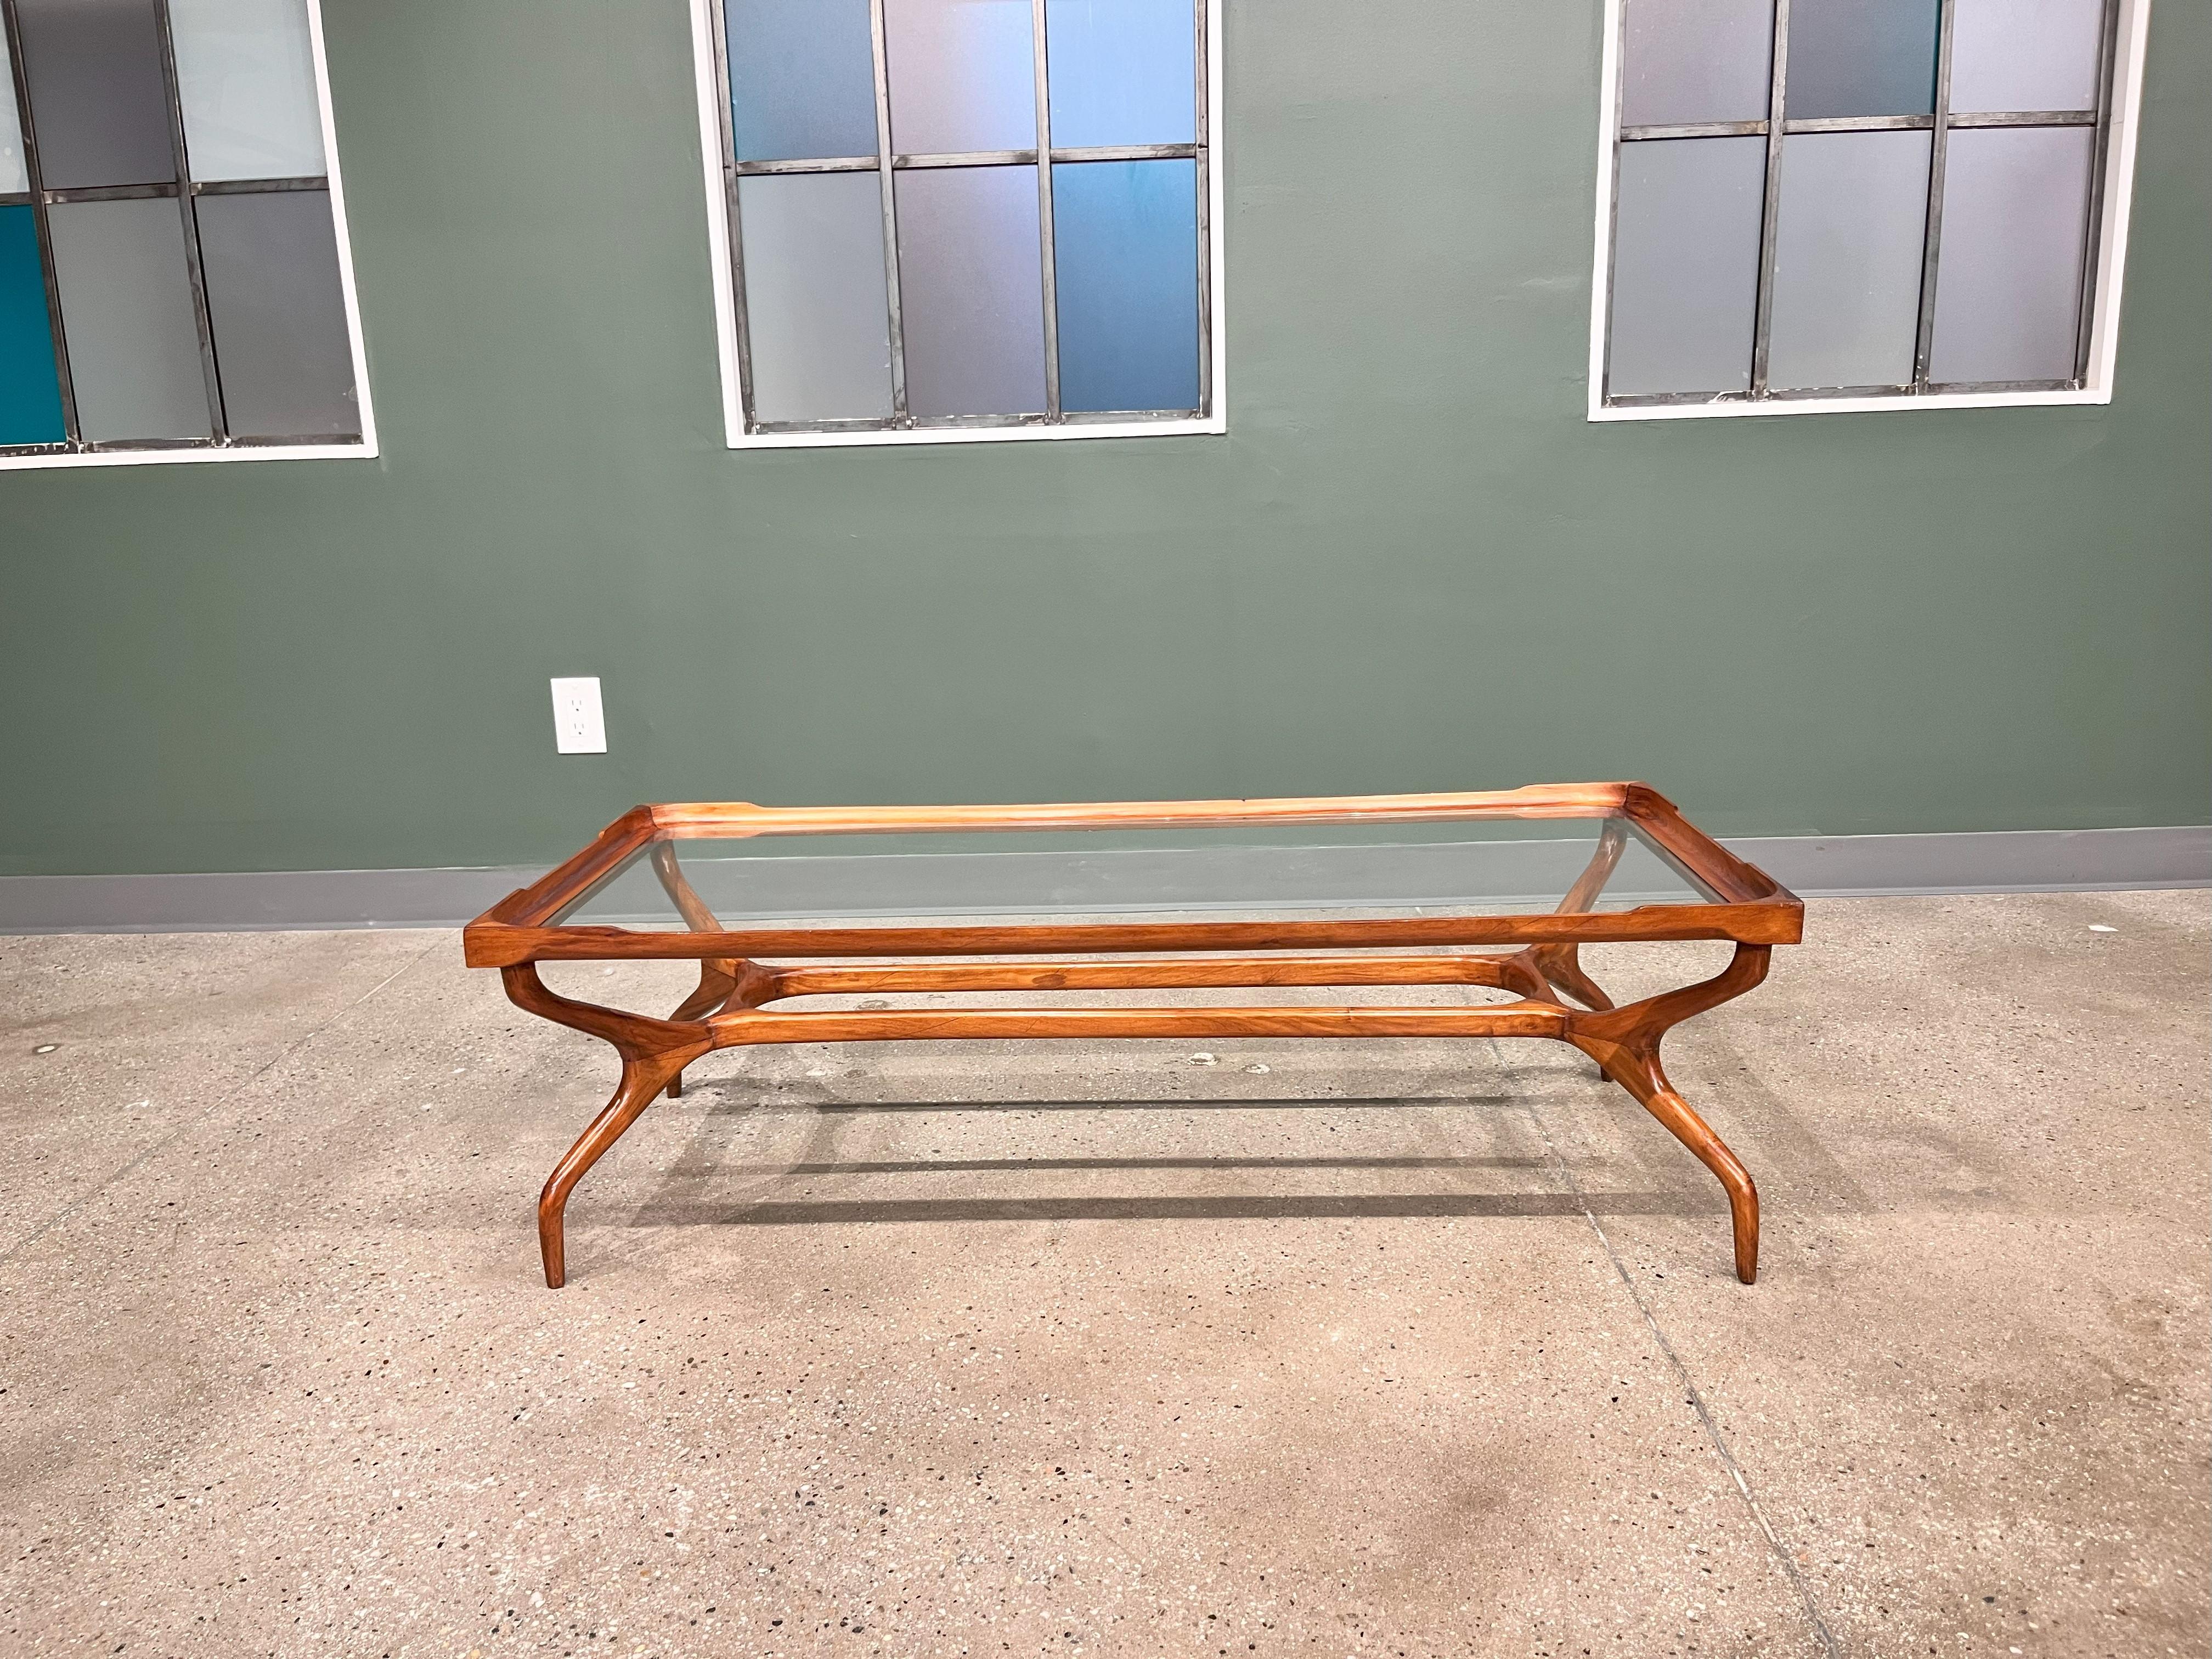 Hand-Carved Brazilian Modern Coffee Table in Hardwood & Glass, Giuseppe Scapinelli 1950s For Sale